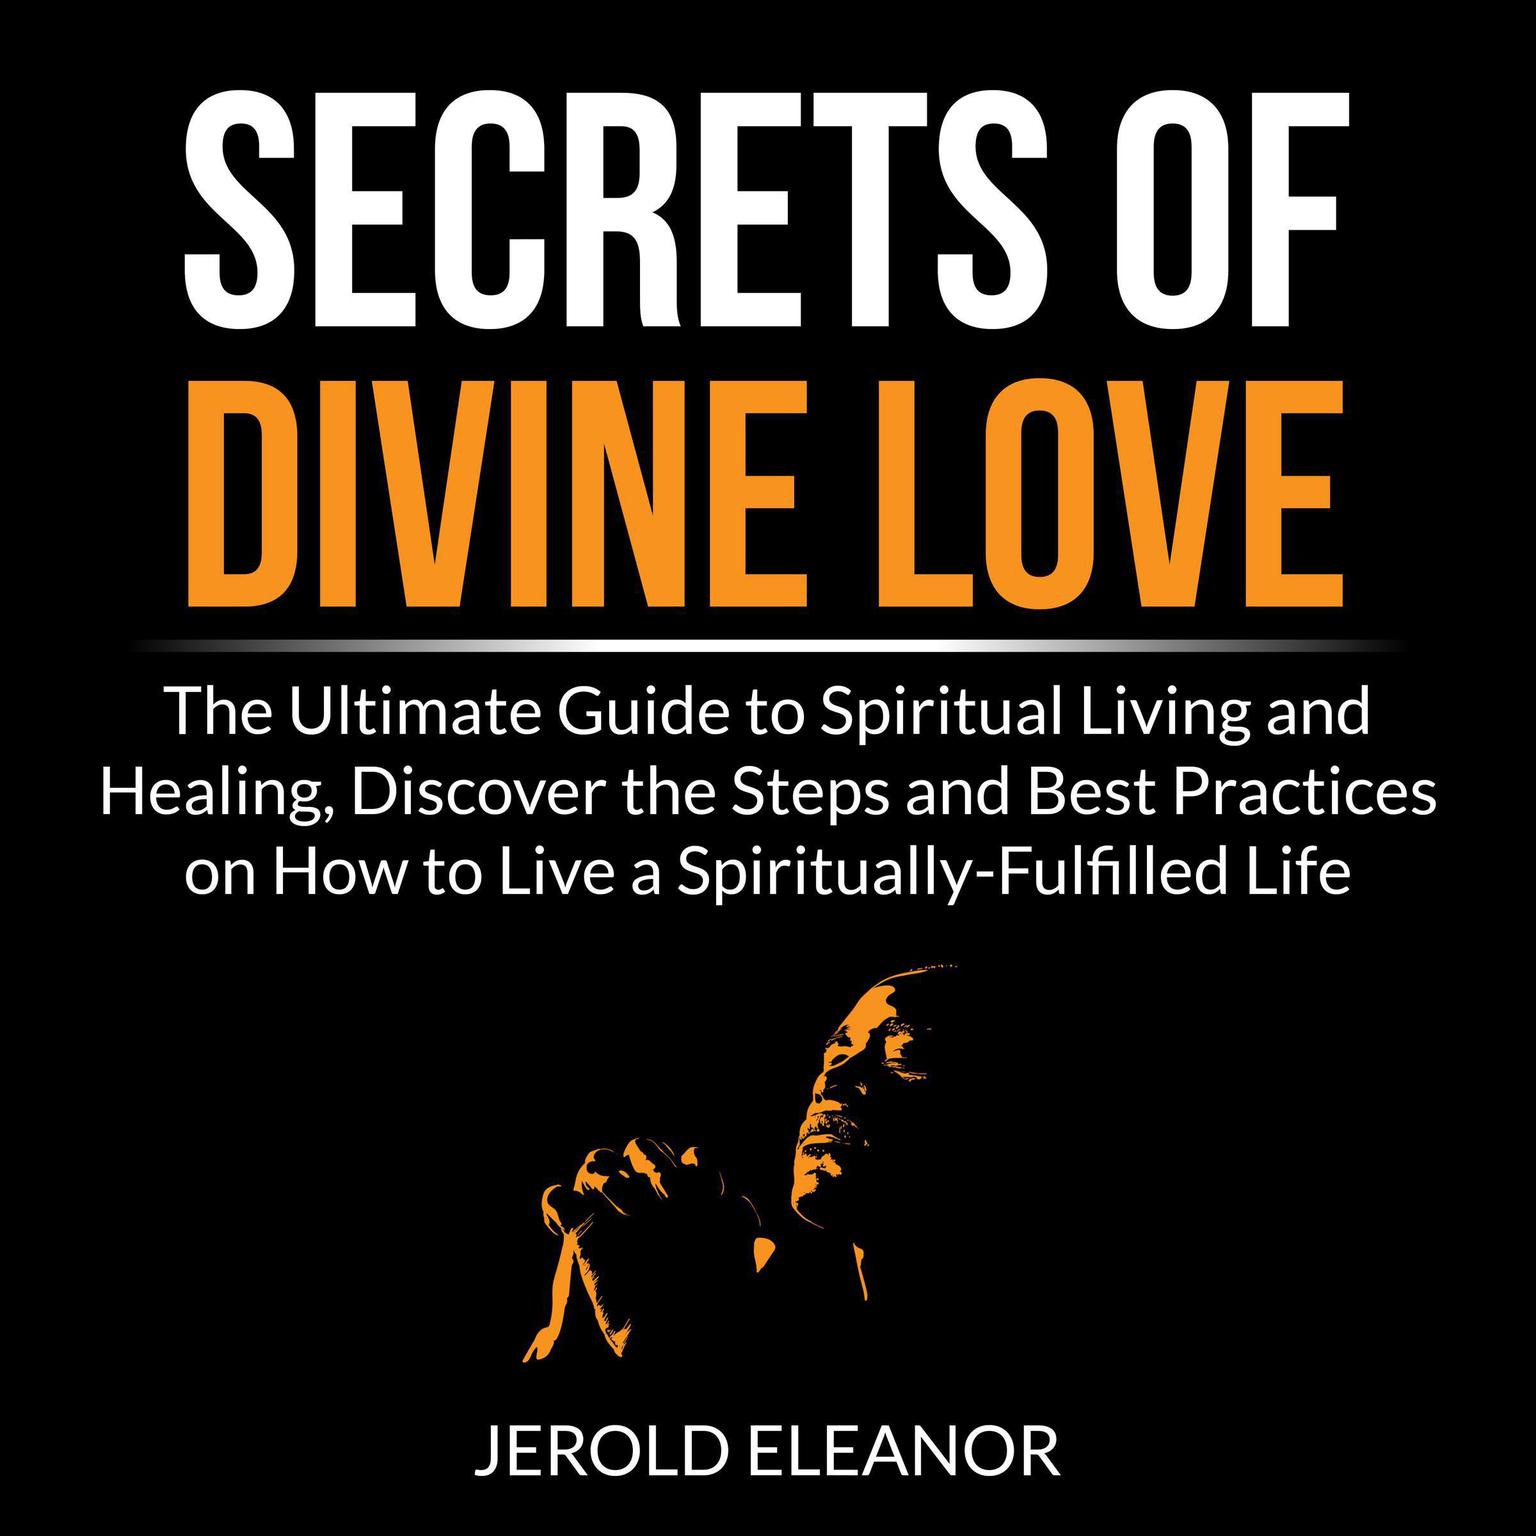 Secrets of Divine Love: The Ultimate Guide to Spiritual Living and Healing, Discover the Steps and Best Practices on How to Live a Spiritually-Fulfilled Life Audiobook, by Jerold Eleanor